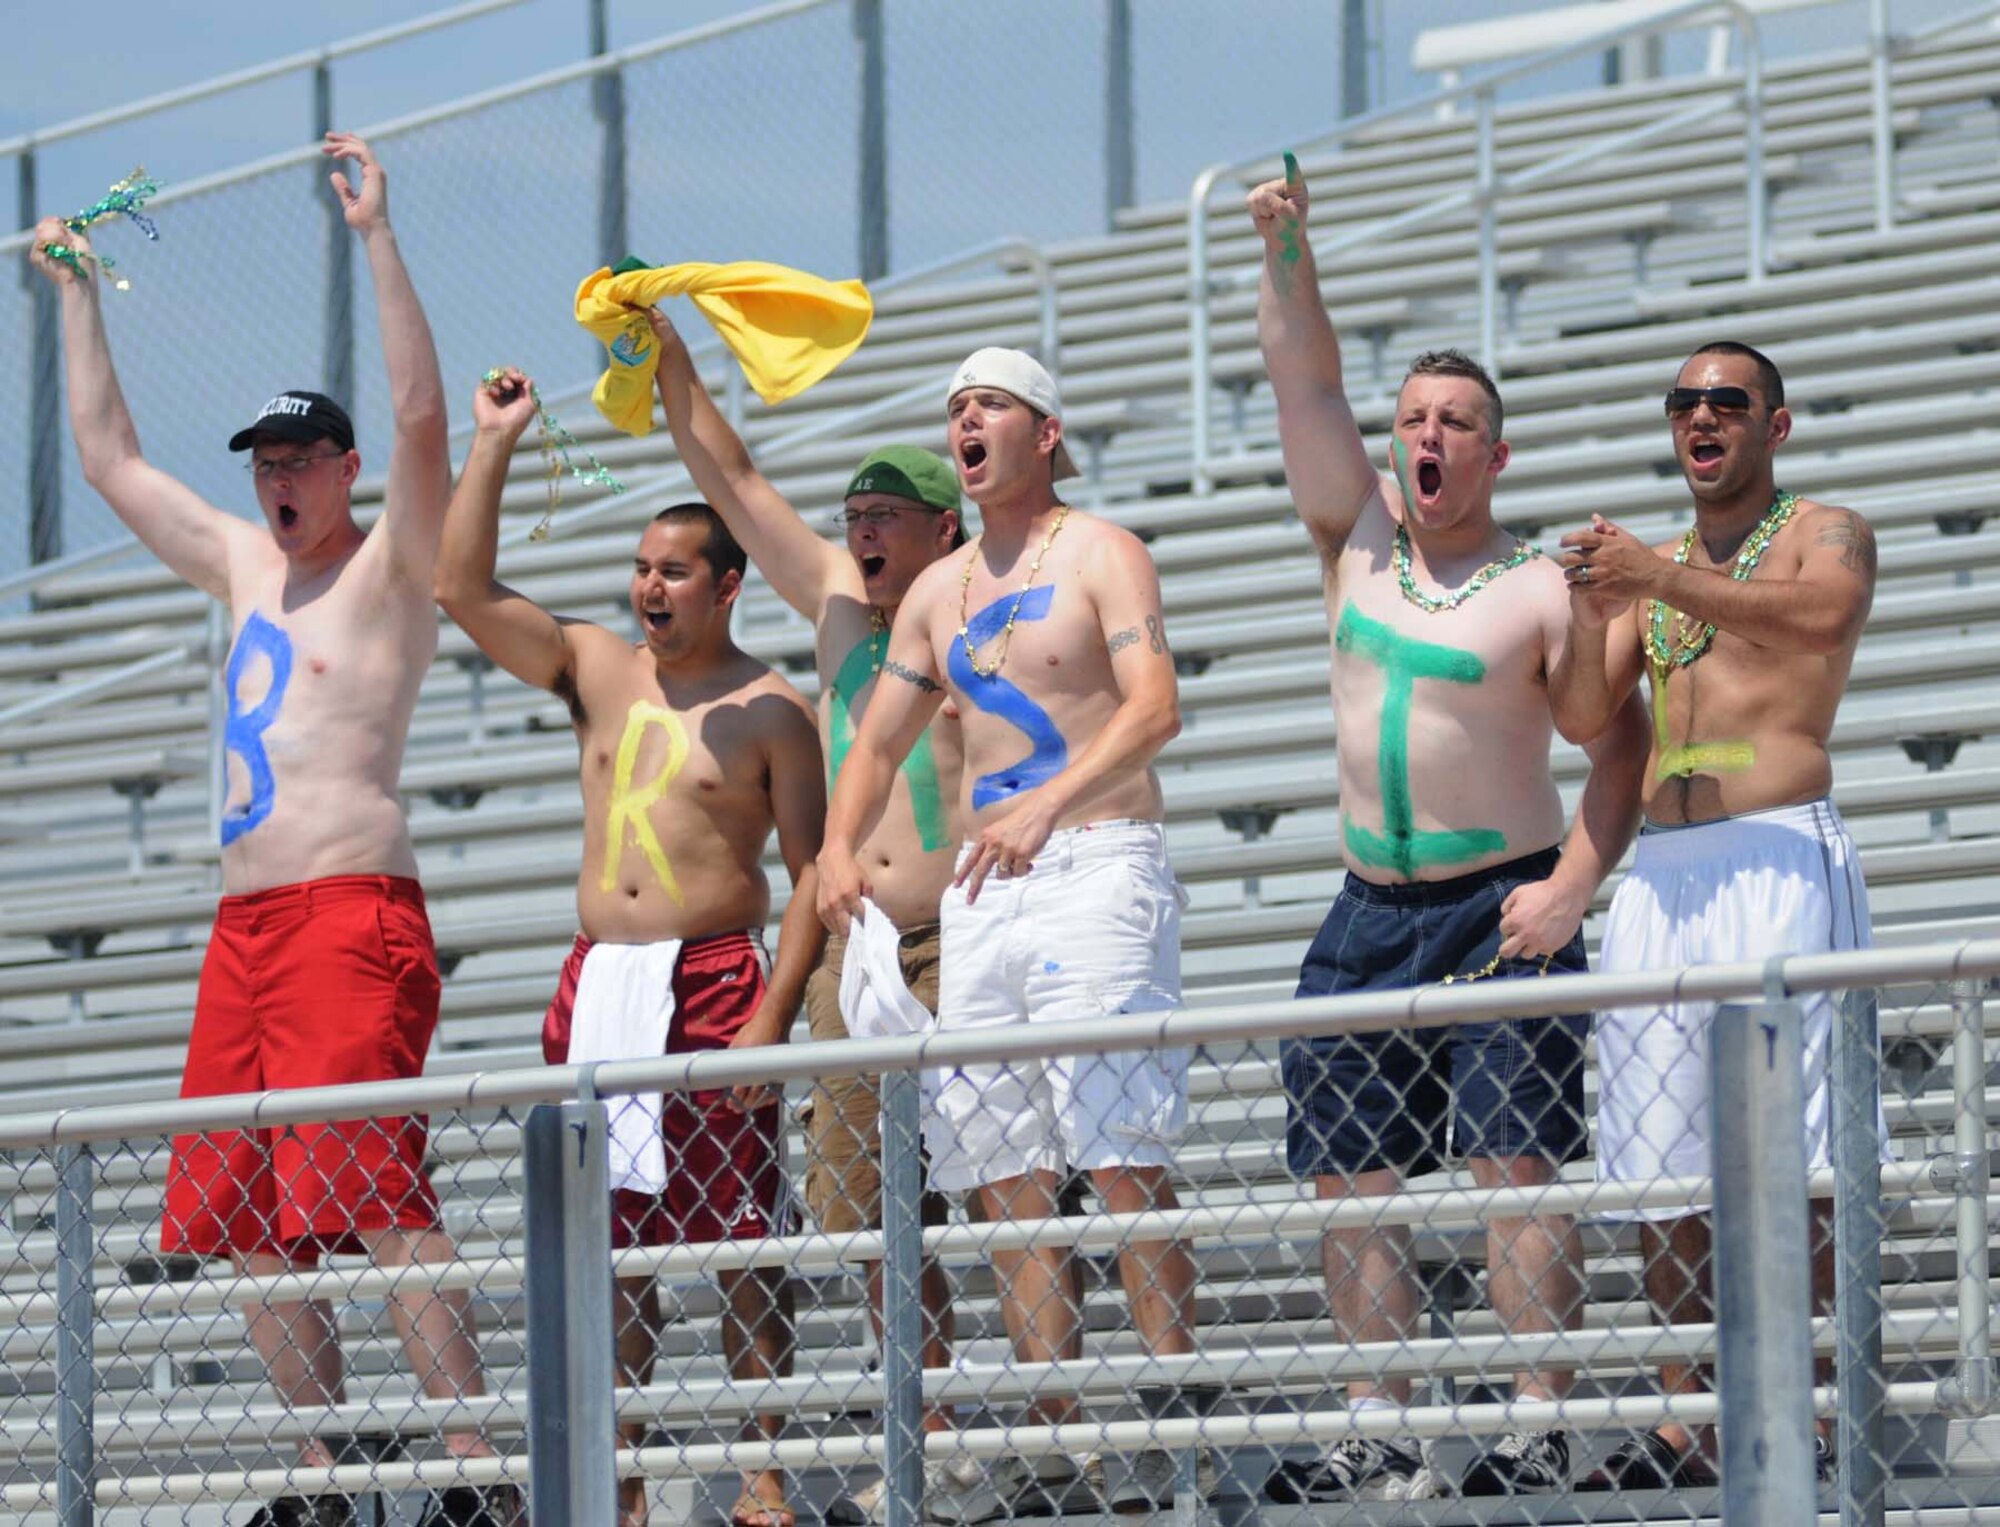 From left, Jacob Tarver, David MacDonald, Caleb Foy, Christopher Turknett and Juan Rivera cheer on the Brazilian team to a 1-0 victory during the title game of the Counseil du International Sports Militaire women’s soccer championship tournament at Biloxi High Stadium.  The cheering squad is from the 81st Security Forces Squadron.  The 81st SFS was only one of the units on base that ‘adopted’ one of the seven teams that competed.  Keesler hosted the international soccer showcase which began June 6 and ended Saturday.  (U.S. Air Force photo by Kemberly Groue)